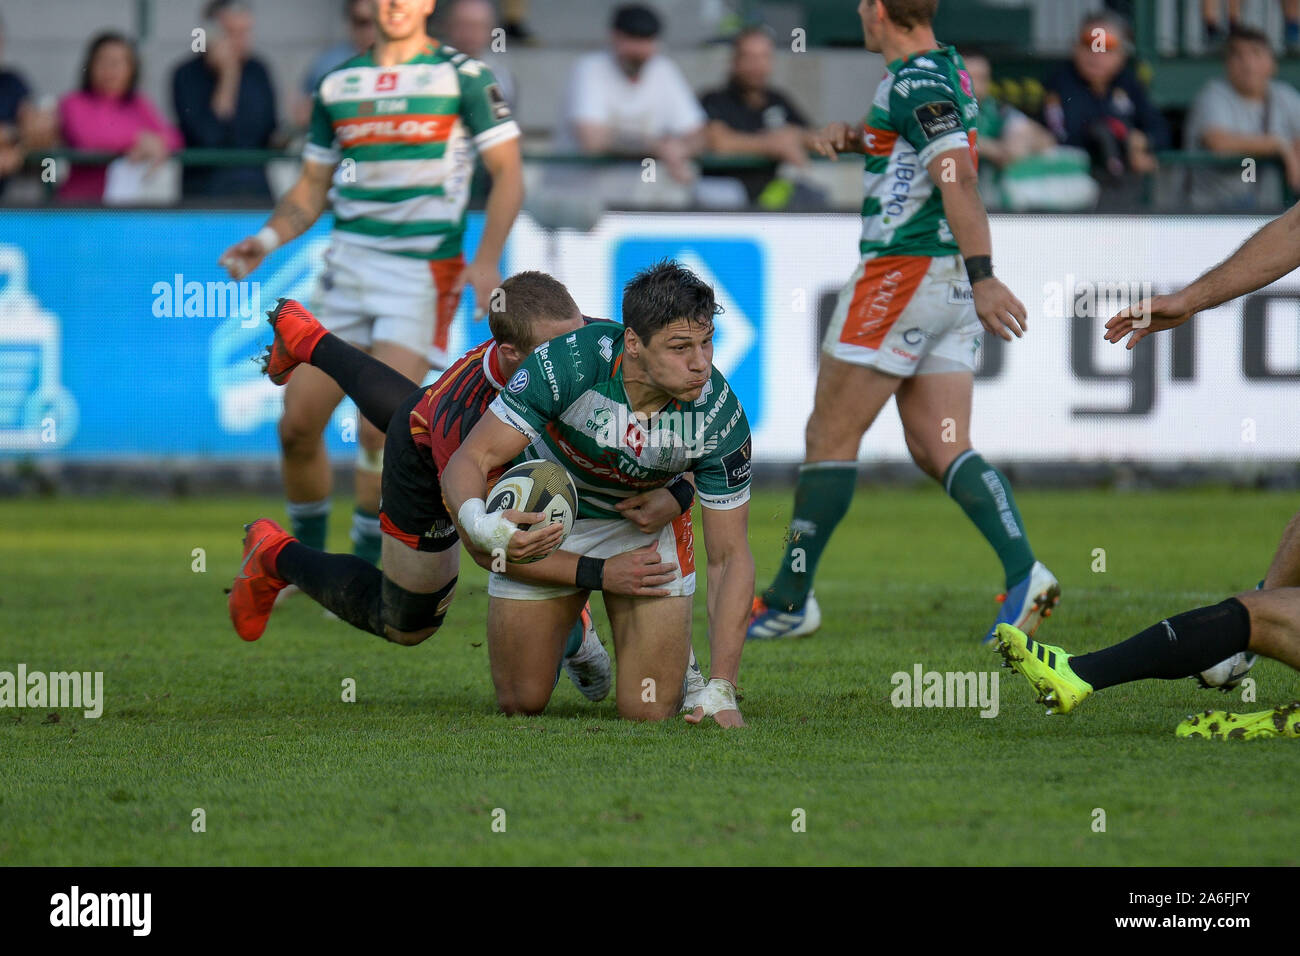 Treviso, Italy. 26th Oct, 2019. ignacio brex (benetton treviso)during Benetton Treviso vs Isuzu Southern Kings, Rugby Guinness Pro 14 in Treviso, Italy, October 26 2019 - LPS/Ettore Griffoni Credit: Ettore Griffoni/LPS/ZUMA Wire/Alamy Live News Stock Photo